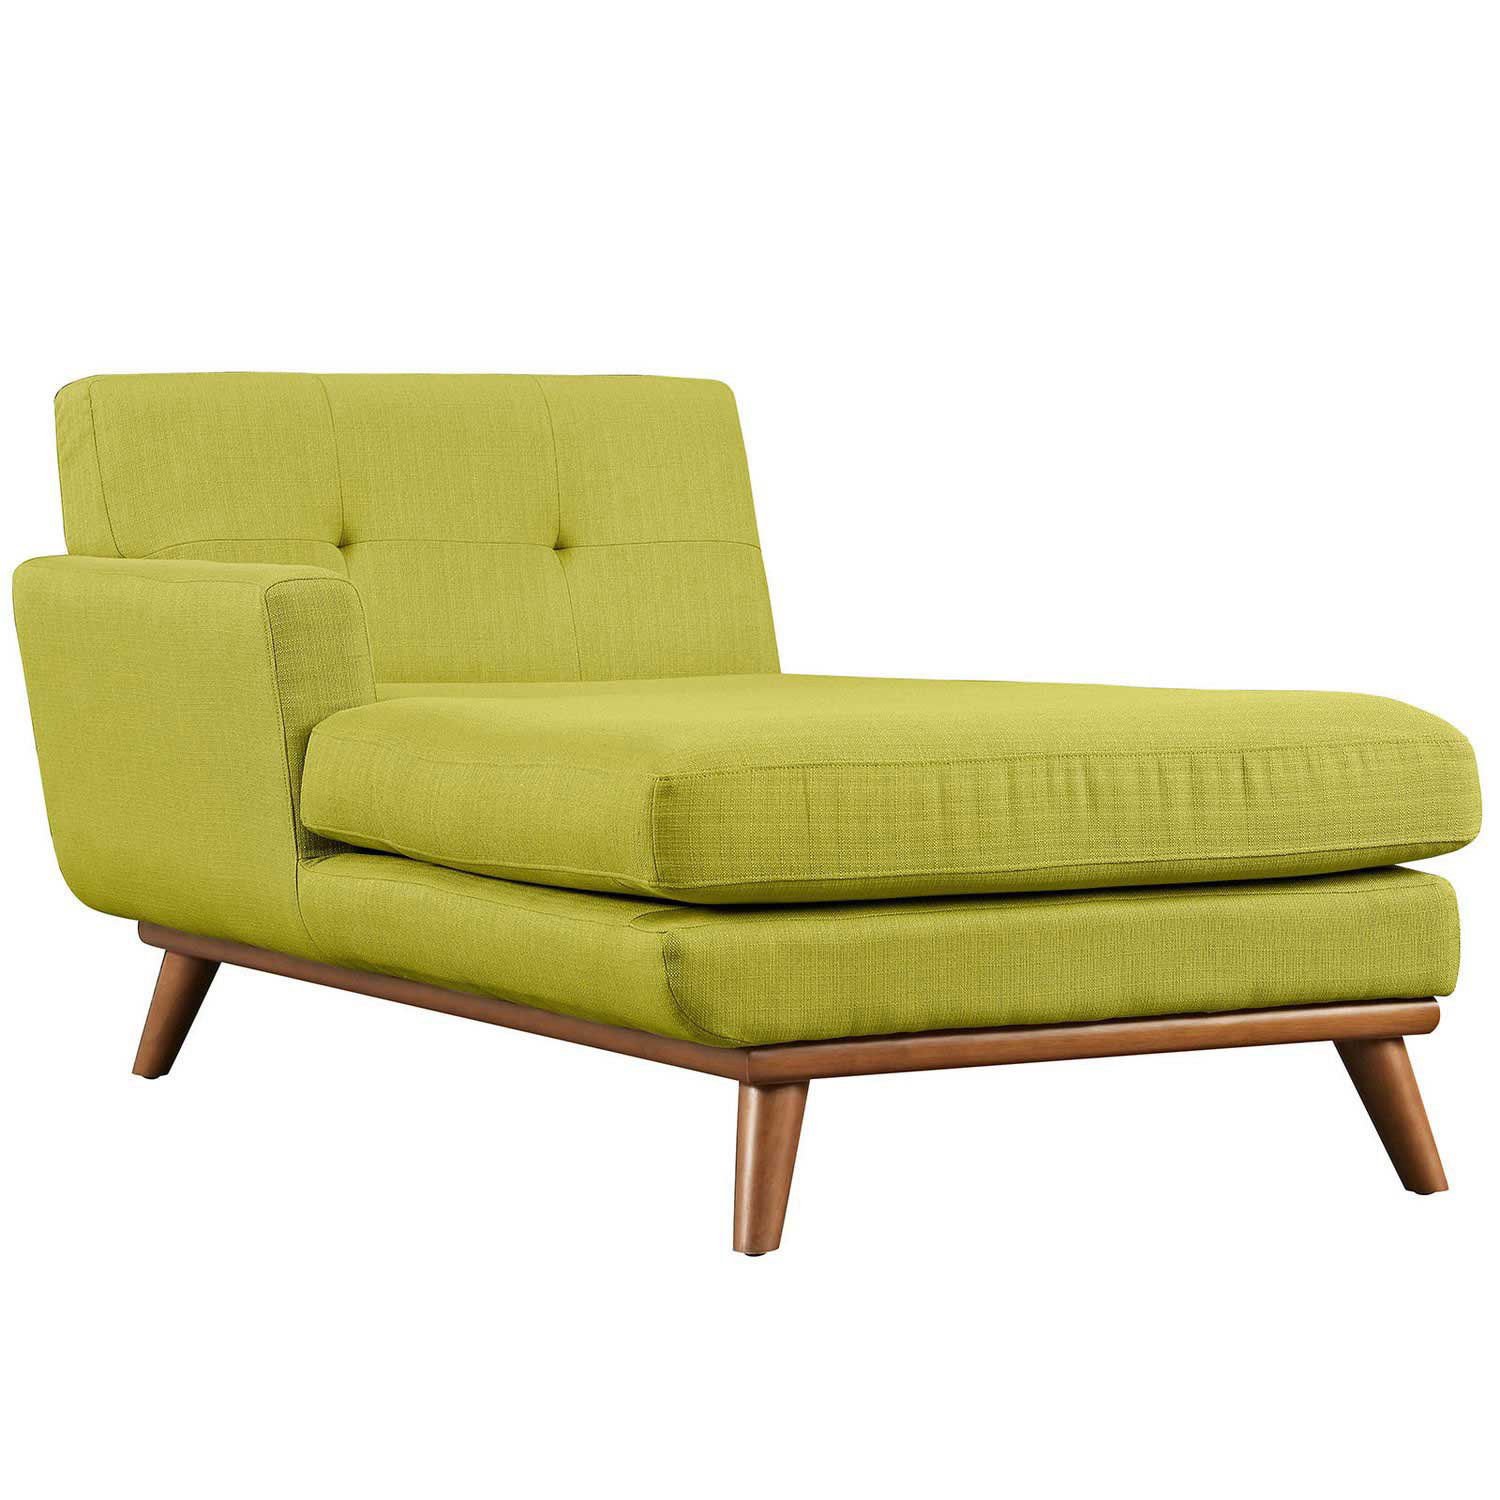 Modway Engage Left Arm Chaise - Wheatgrass